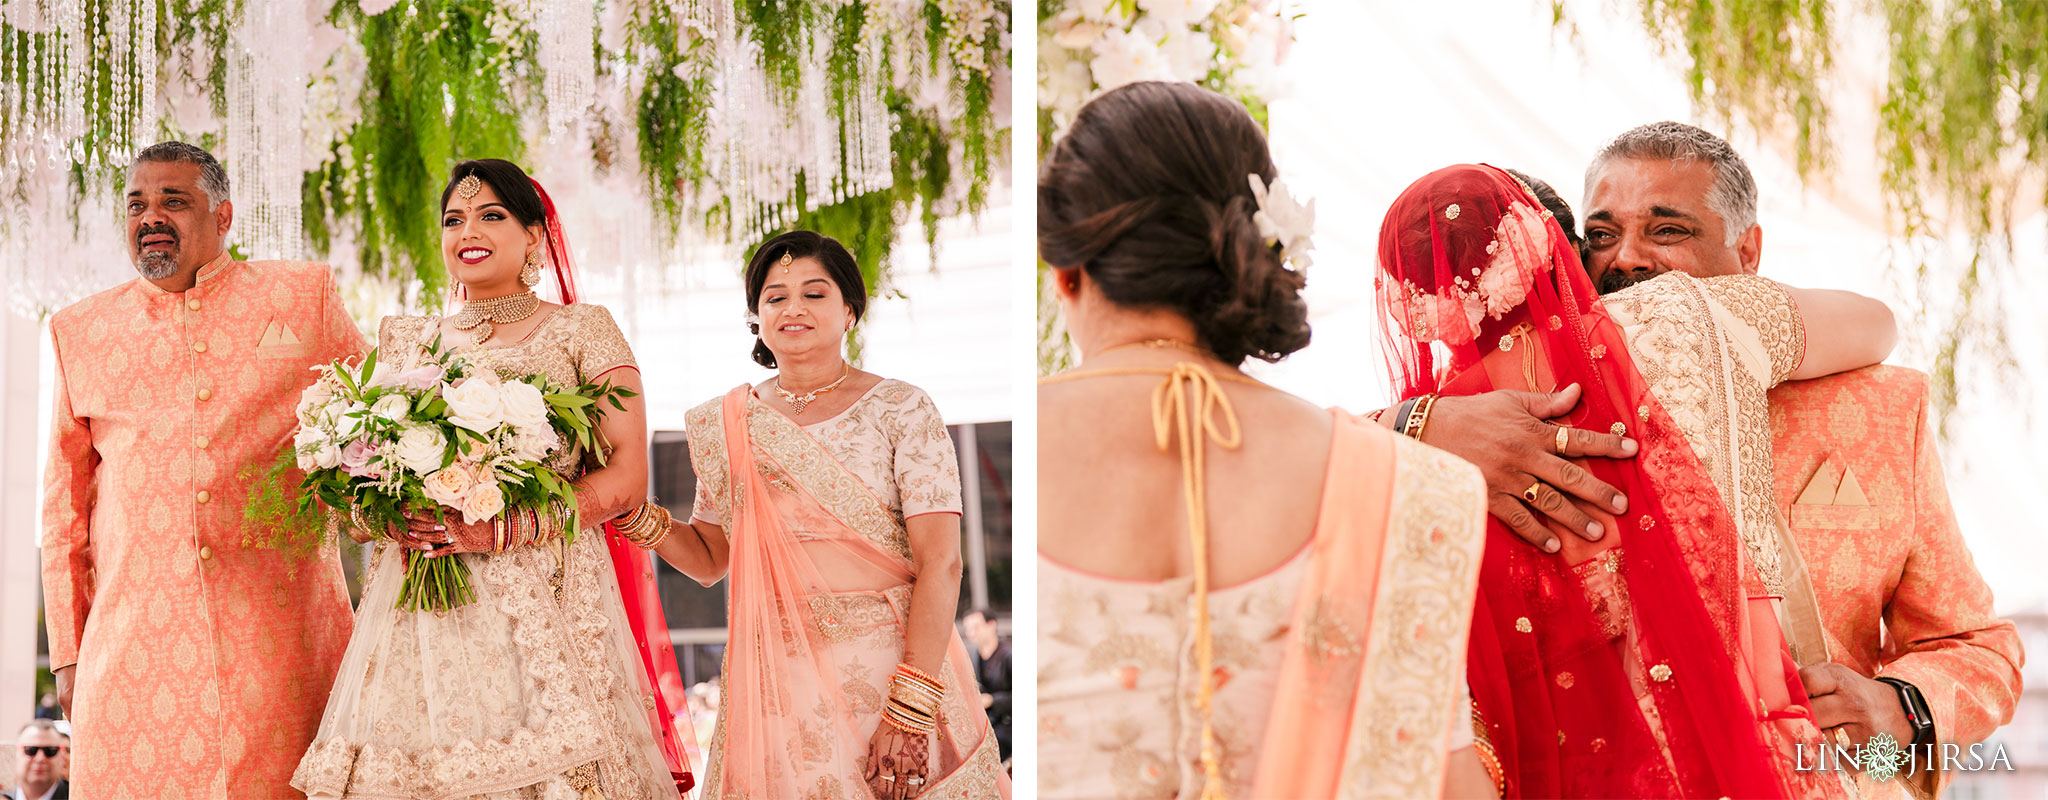 037 Long Beach Performing Arts Center Indian Wedding Ceremony Photography